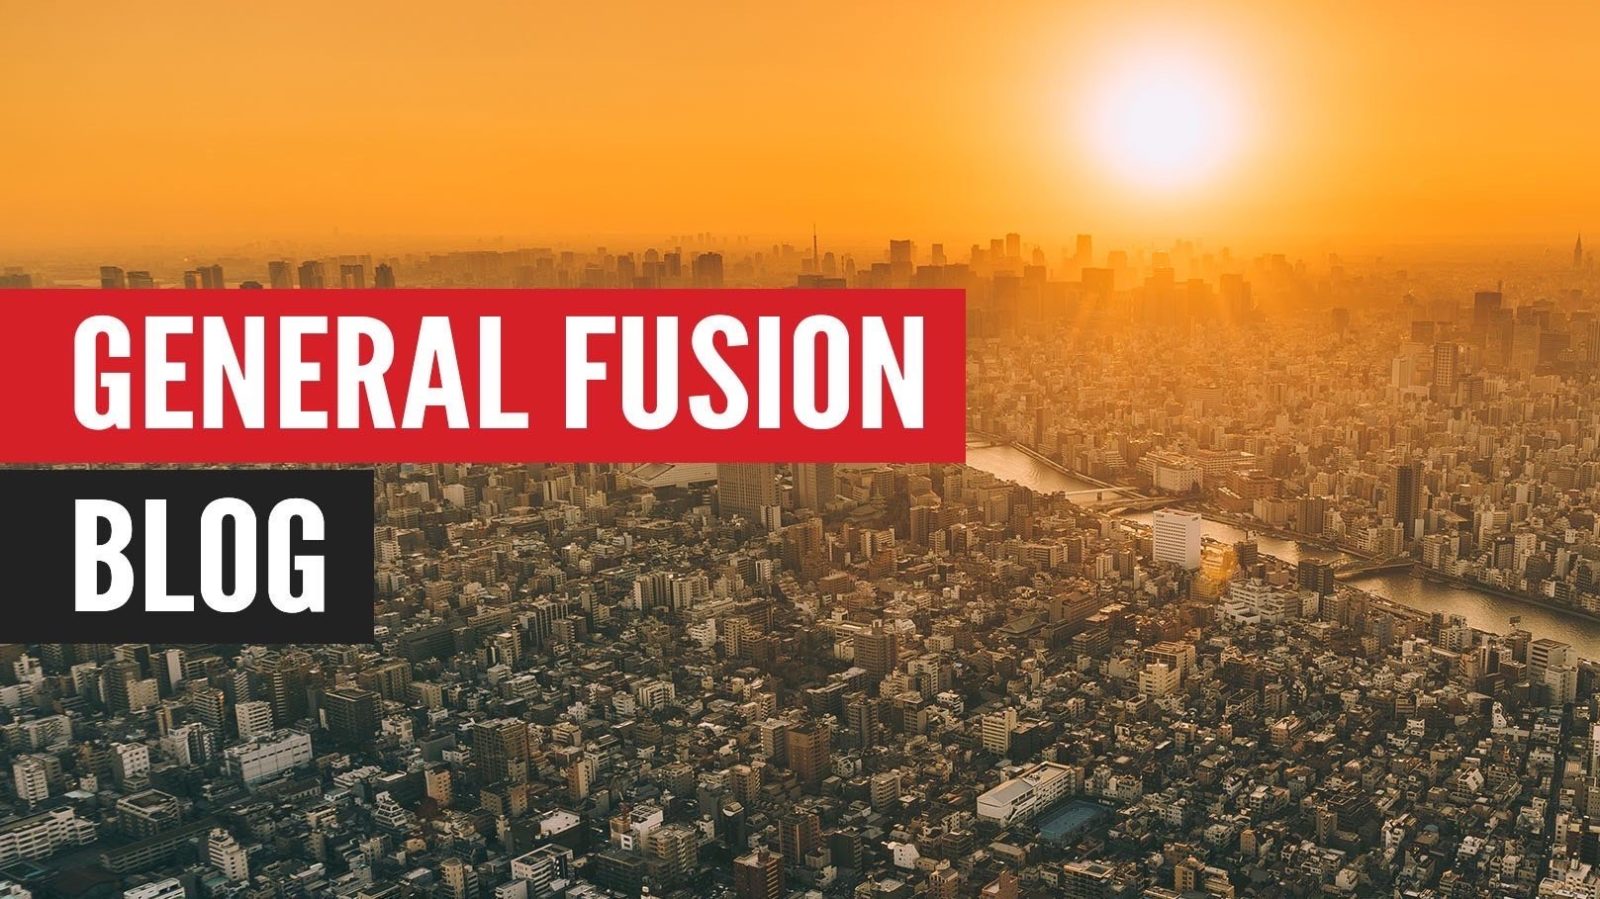 Progress during a pandemic: Fusion’s future emerges